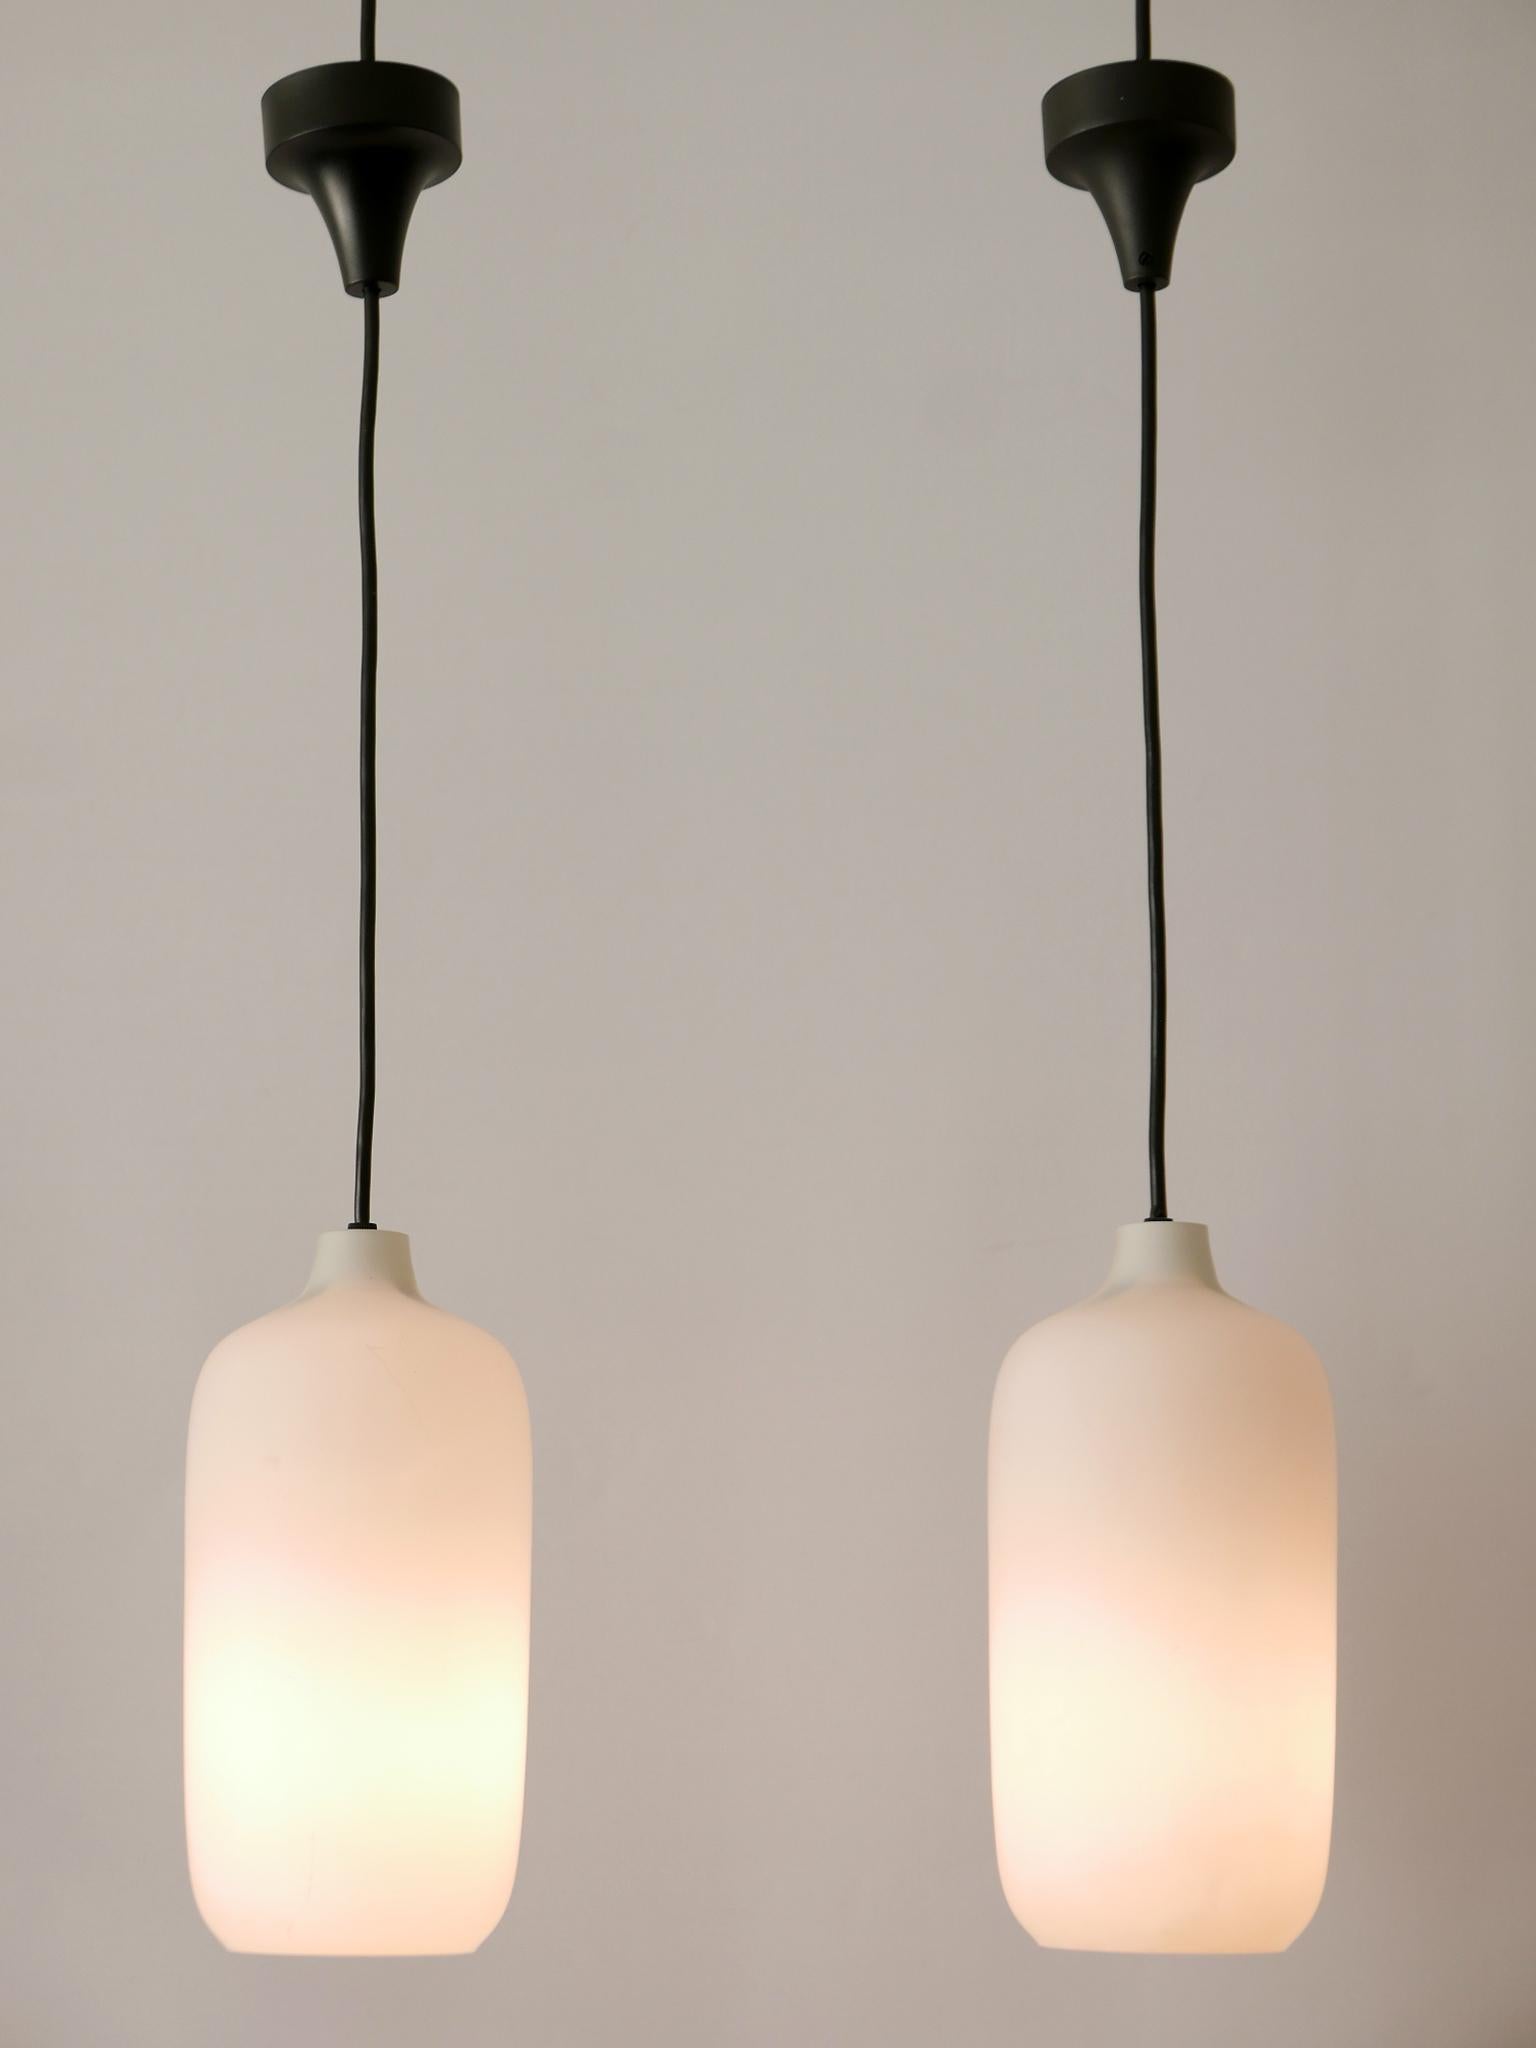 Set of two lovely and elegant Mid-Century Modern opaline glass pendant lamps in organic shape. Designed and manufactured in Scandinavia, 1960s.

Executed in opaline glass, each pendant lamp has 1 x E14 / E12 Edison screw fit bulb socket, is wired